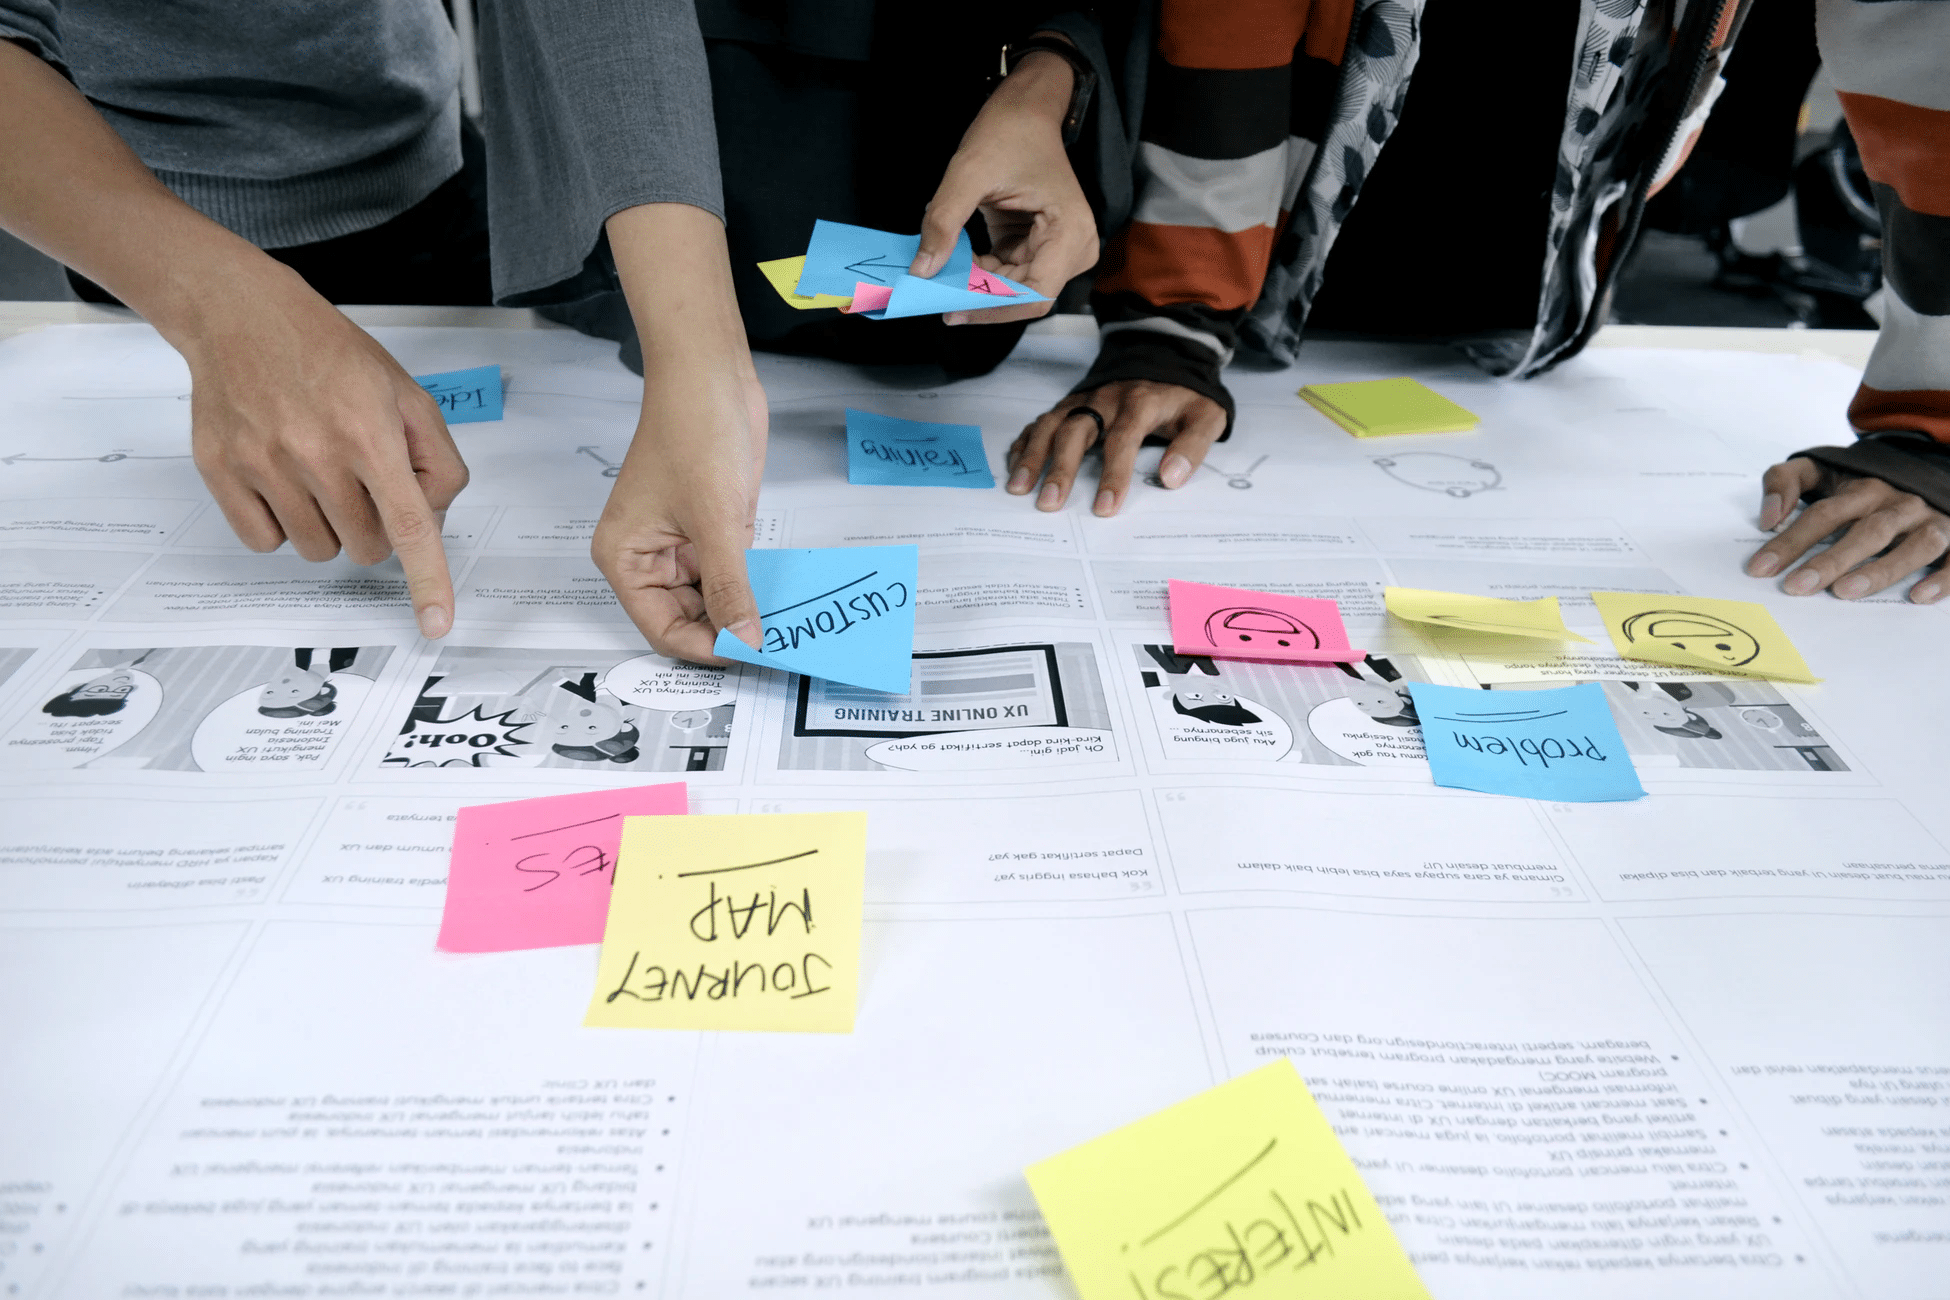 Mapping out realistic experience maps, customer journeys, and service blueprints.